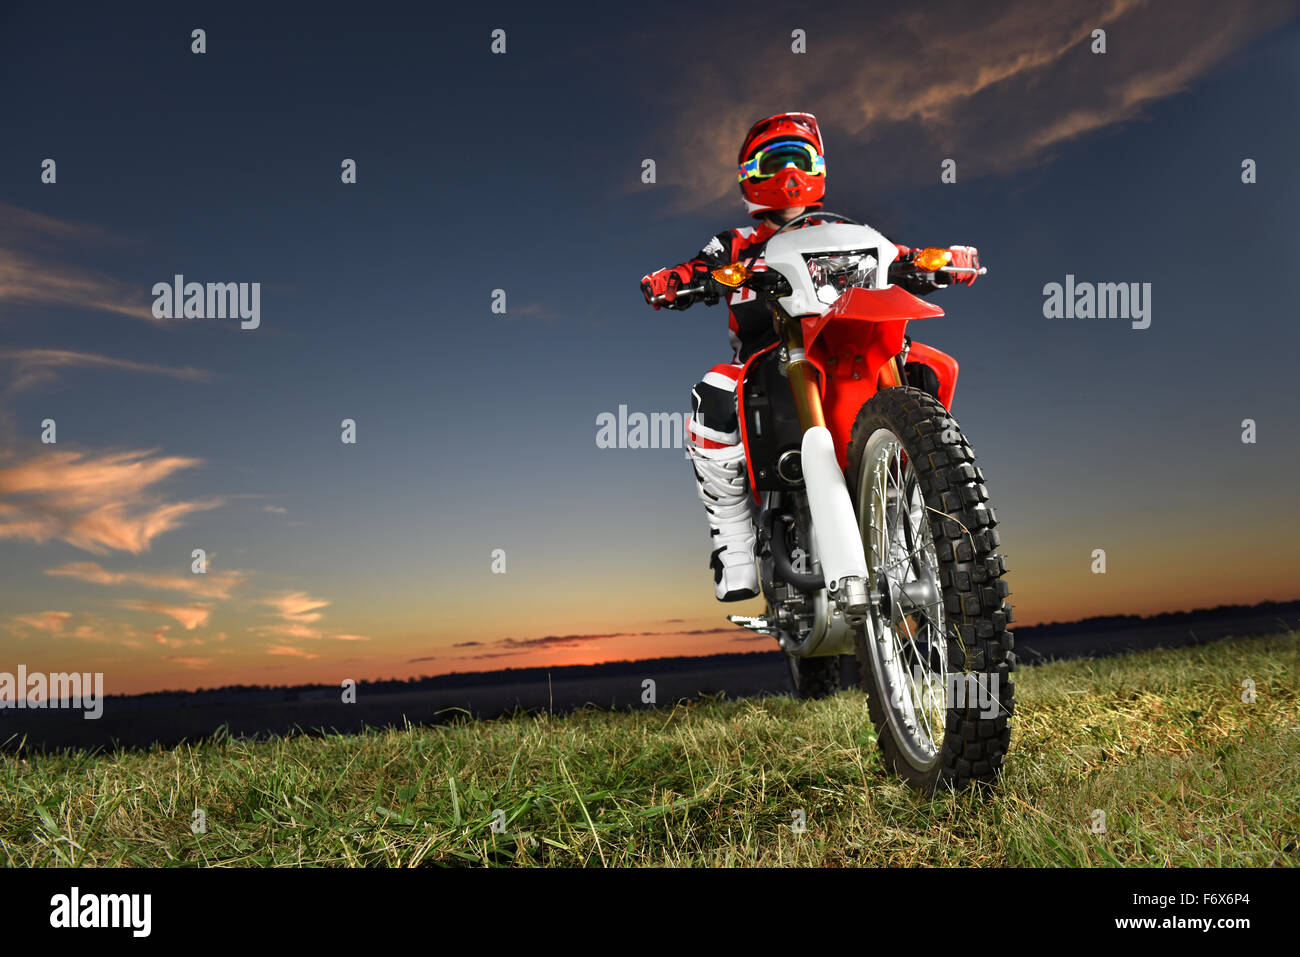 Man riding motocross bike at sunset - With copy space Stock Photo